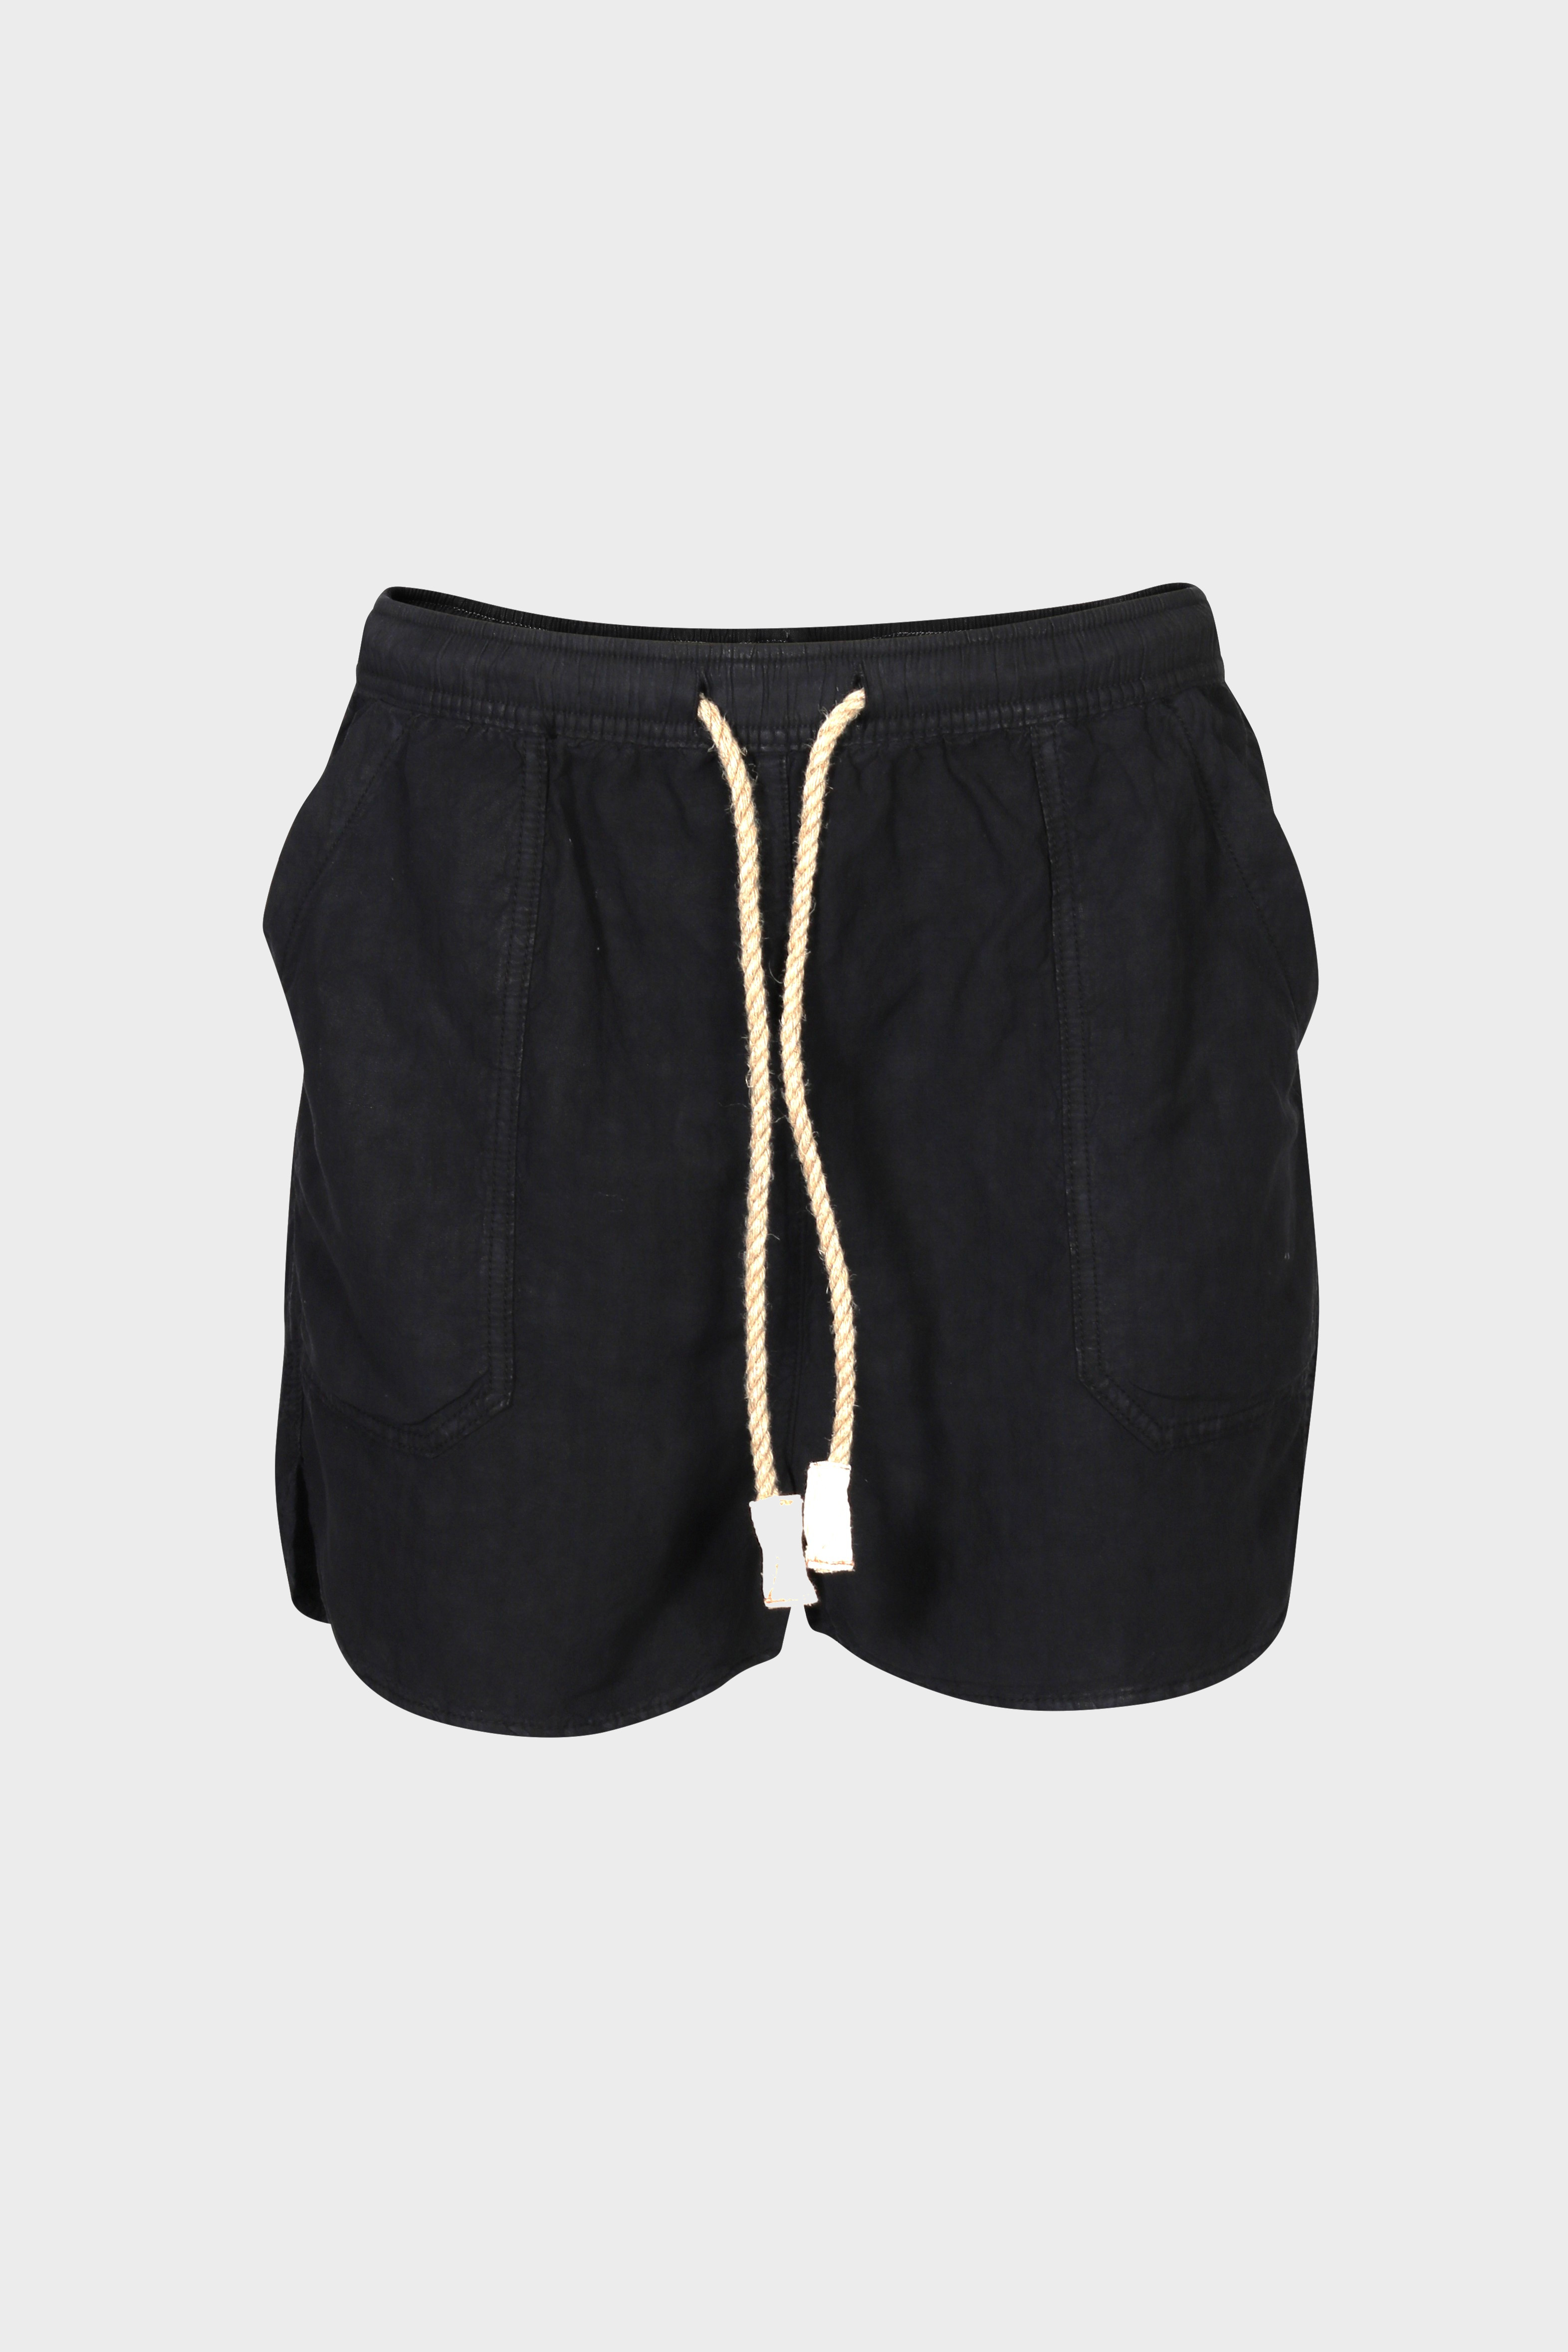 DR. COLLECTORS Weekend Silk Shorts in Black XS